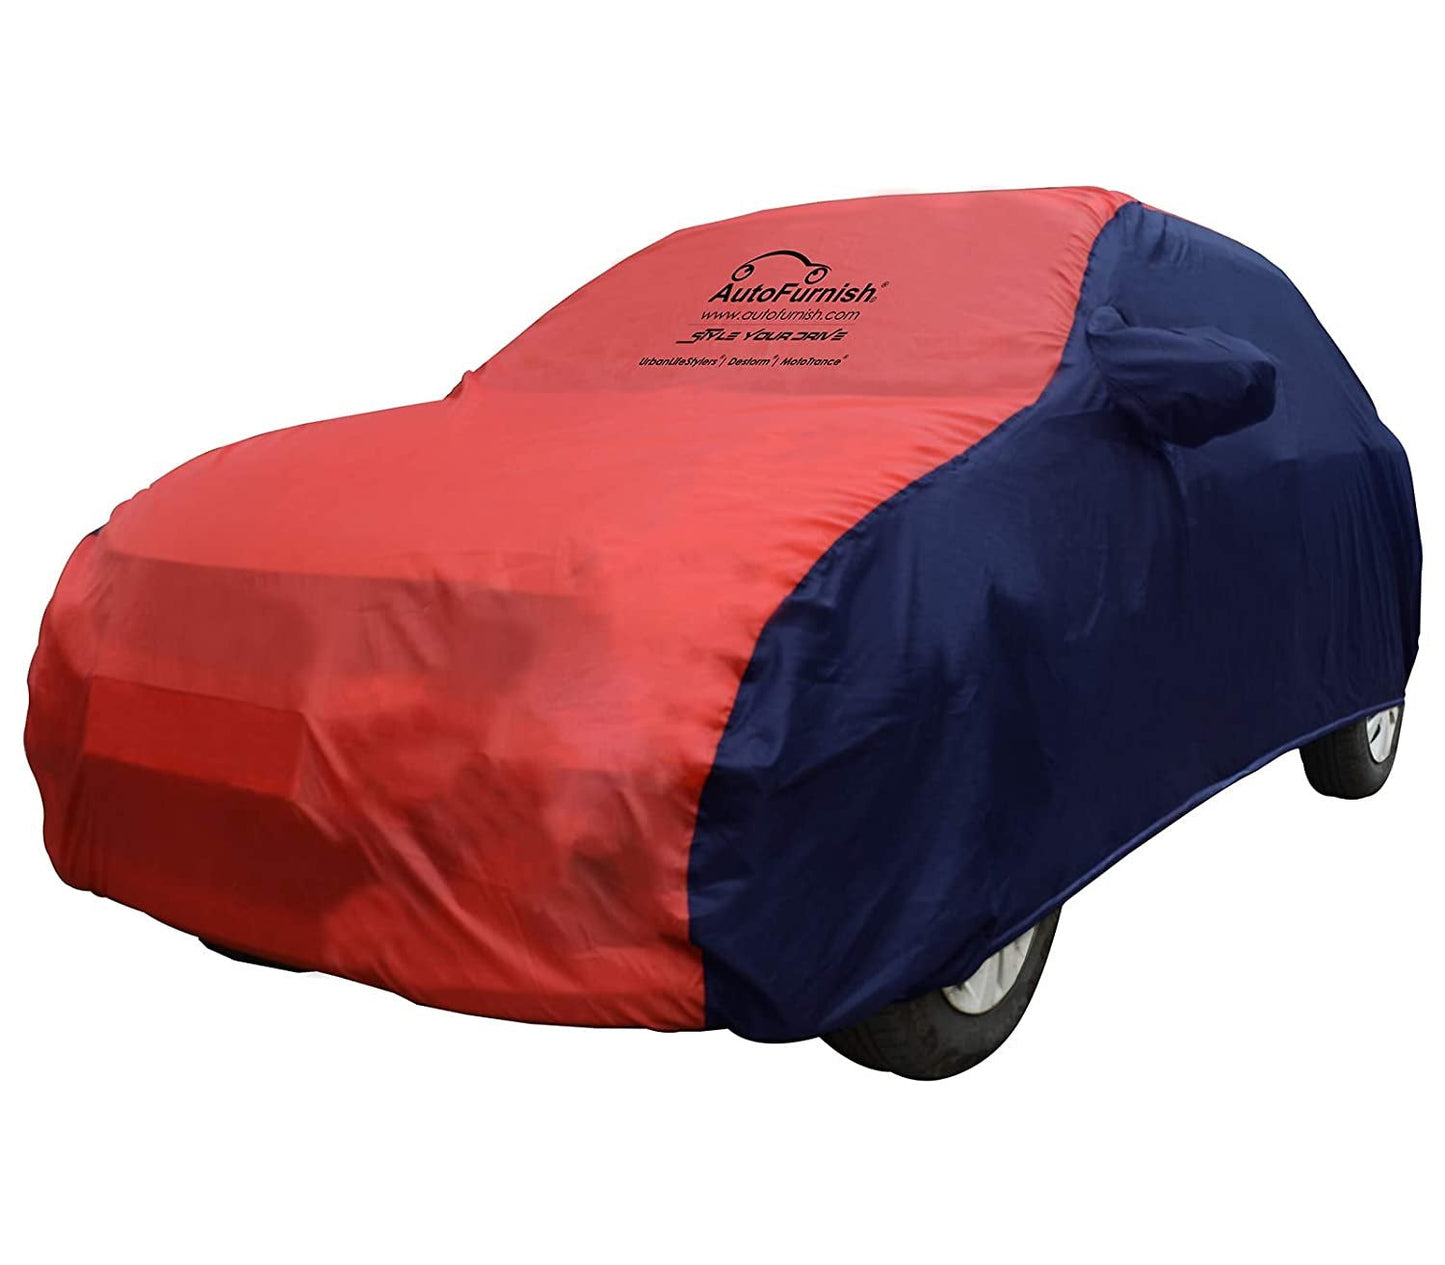 Audi S5 (2019) Car Body Cover, Triple Stitched, Heat & Water Resistant with Side Mirror Pockets (SPORTY Series)